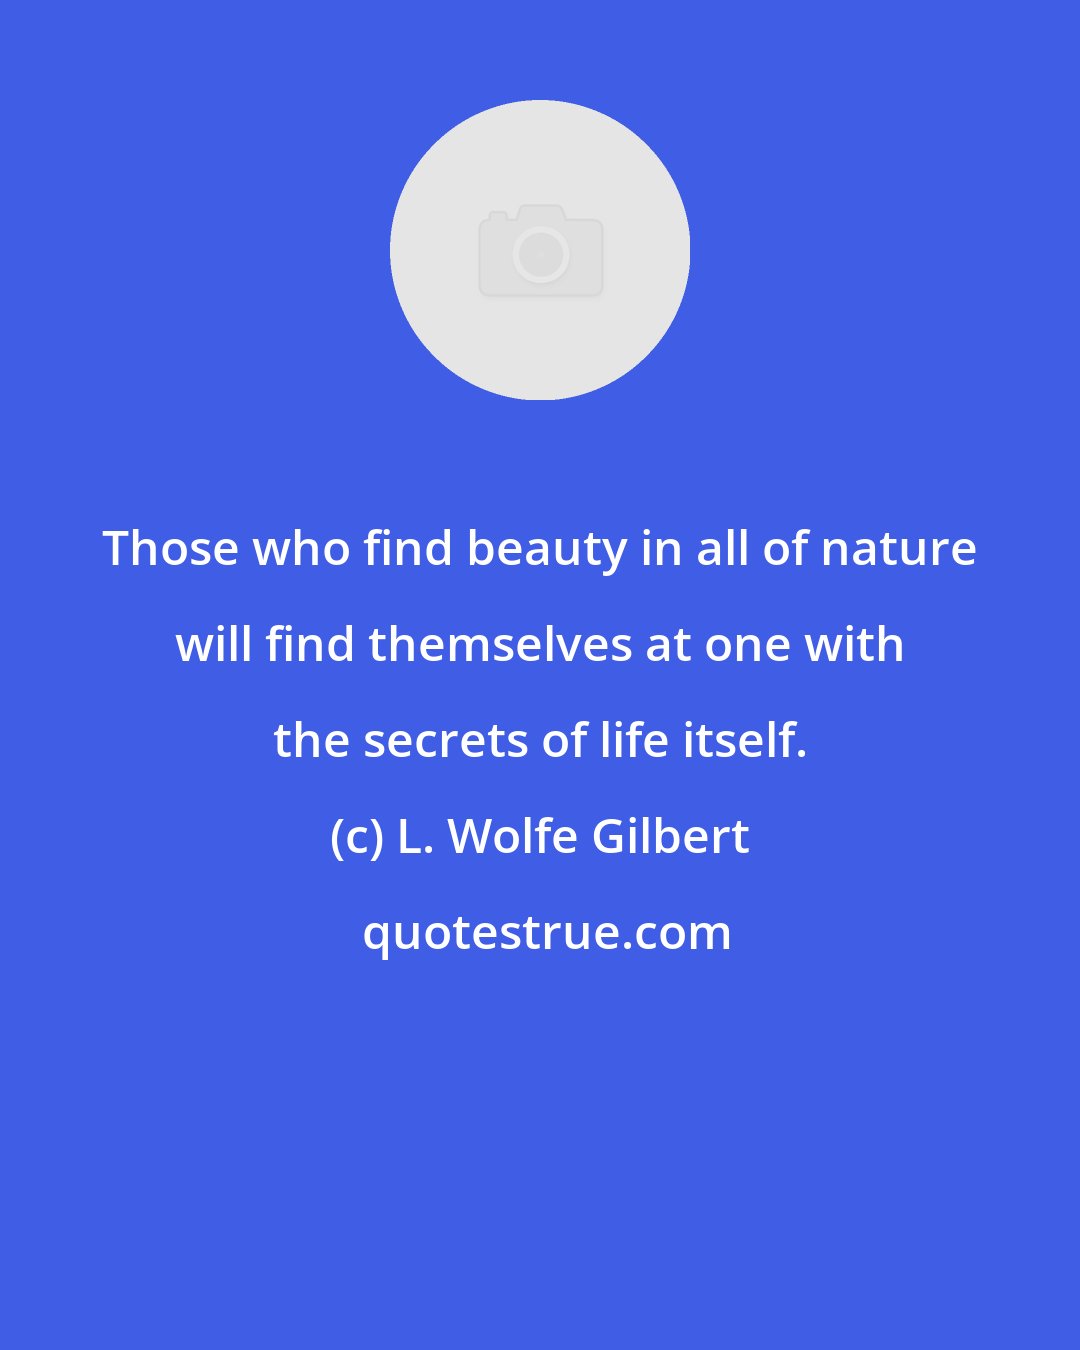 L. Wolfe Gilbert: Those who find beauty in all of nature will find themselves at one with the secrets of life itself.